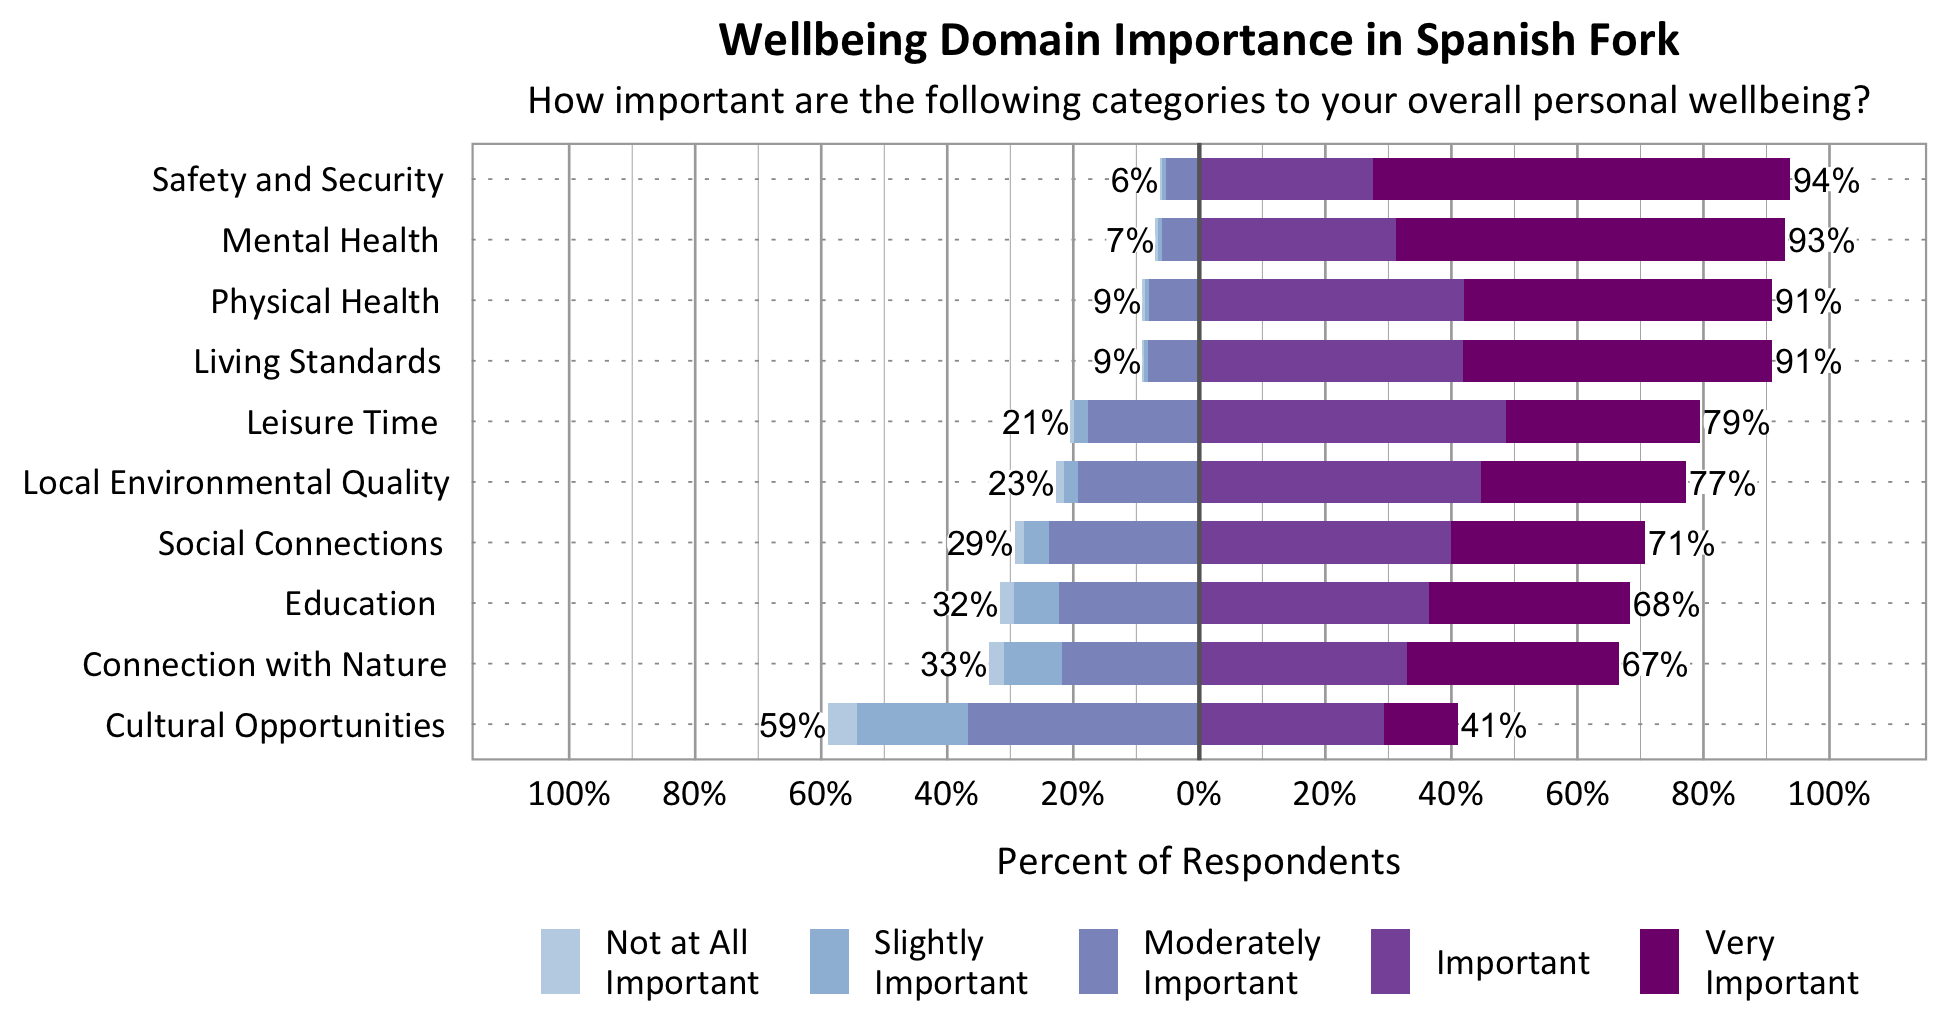 Likert Graph. Title: Wellbeing Domain Importance in Spanish Fork. Subtitle: How important are the following categories to your overall personal wellbeing? Physical Health - 9% of respondents rated as not at all important, slightly important, or moderately important while 91% rated as important or very important; Category: Safety and Security 6% of respondents rated as not at all important, slightly important, or moderately important while 94% rated as important or very important; Category: Mental Health - 7% of respondents rated as not at all important, slightly important, or moderately important while 93% rated as important or very important; Category: Living Standards - 9% of respondents rated as not at all important, slightly important, or moderately important while 91% rated as important or very important; Category: Local Environmental Quality - 23% of respondents rated as not at all important, slightly important, or moderately important while 77% of respondents rated as important or very important; Category: Leisure Time – 21% of respondents rated as not at all important, slightly important, or moderately important while 79% rated as important or very important; Category: Connection with Nature - 33% of respondents rated as not at all important, slightly important, or moderately important while 67% rated as important or very important; Category: Education - 32% of respondents rated as not at all important, slightly important, or moderately important while 68% rated as important or very important; Category: Social Connections - 29% rated as not at all important, slightly important, or moderately important while 71% rated as important or very important; Category: Cultural Opportunities - 59% rated as not at all important, slightly important, or moderately important while 41% rated as important or very important.